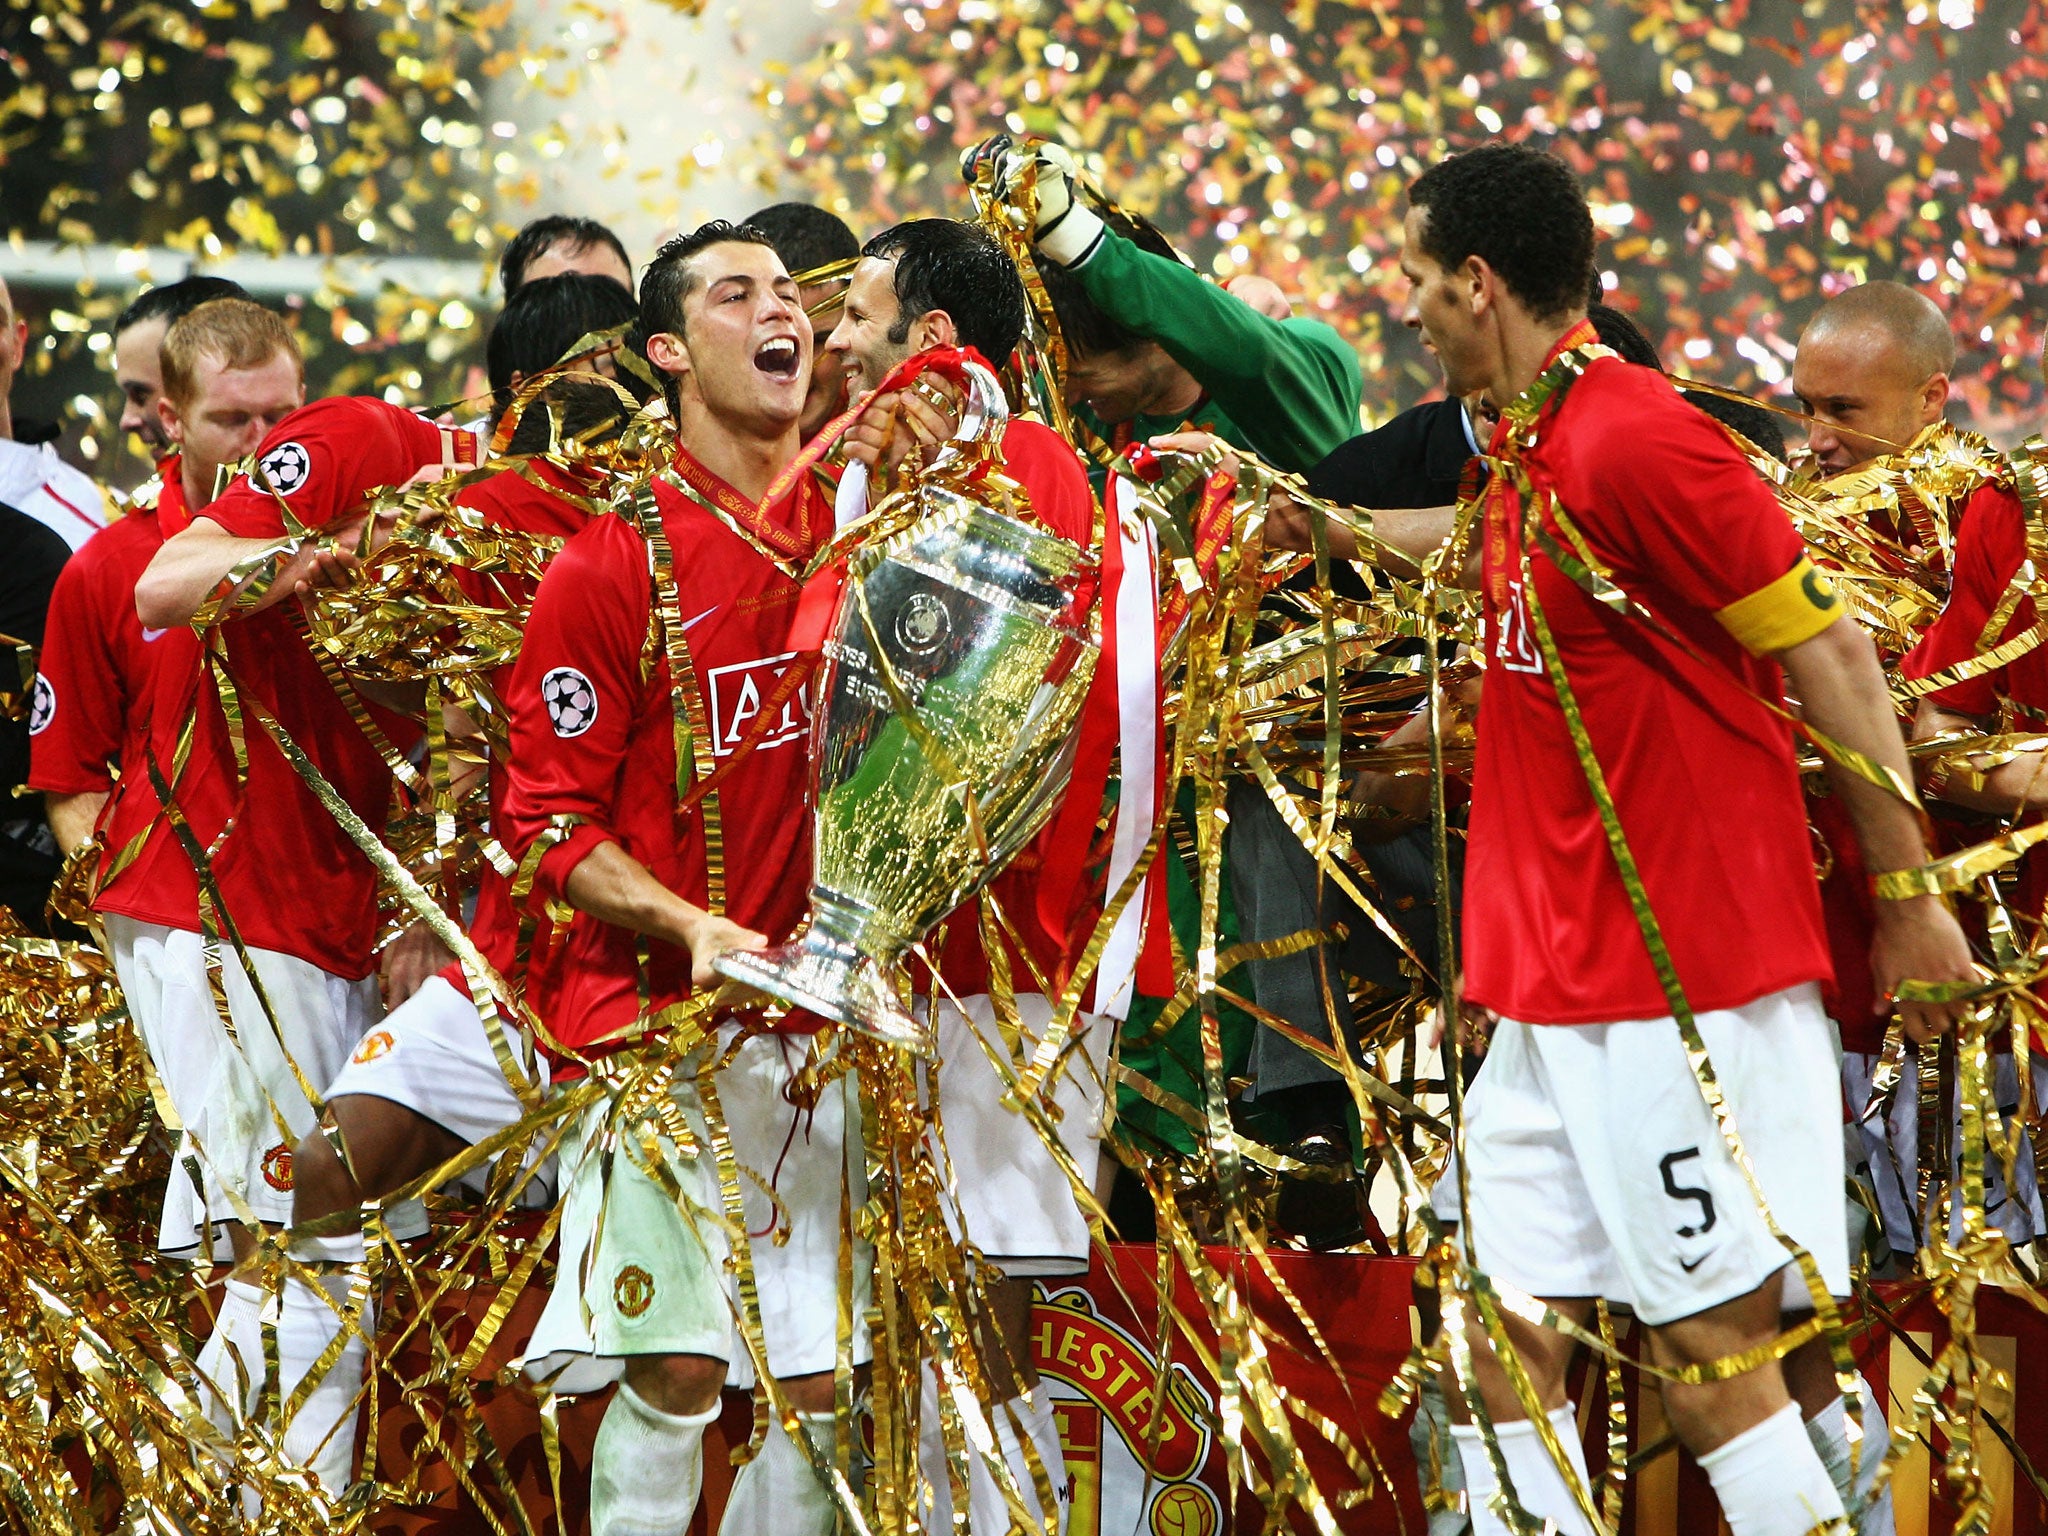 Manchester United lifted the Champions League trophy in the 2008 final - the last all-English final